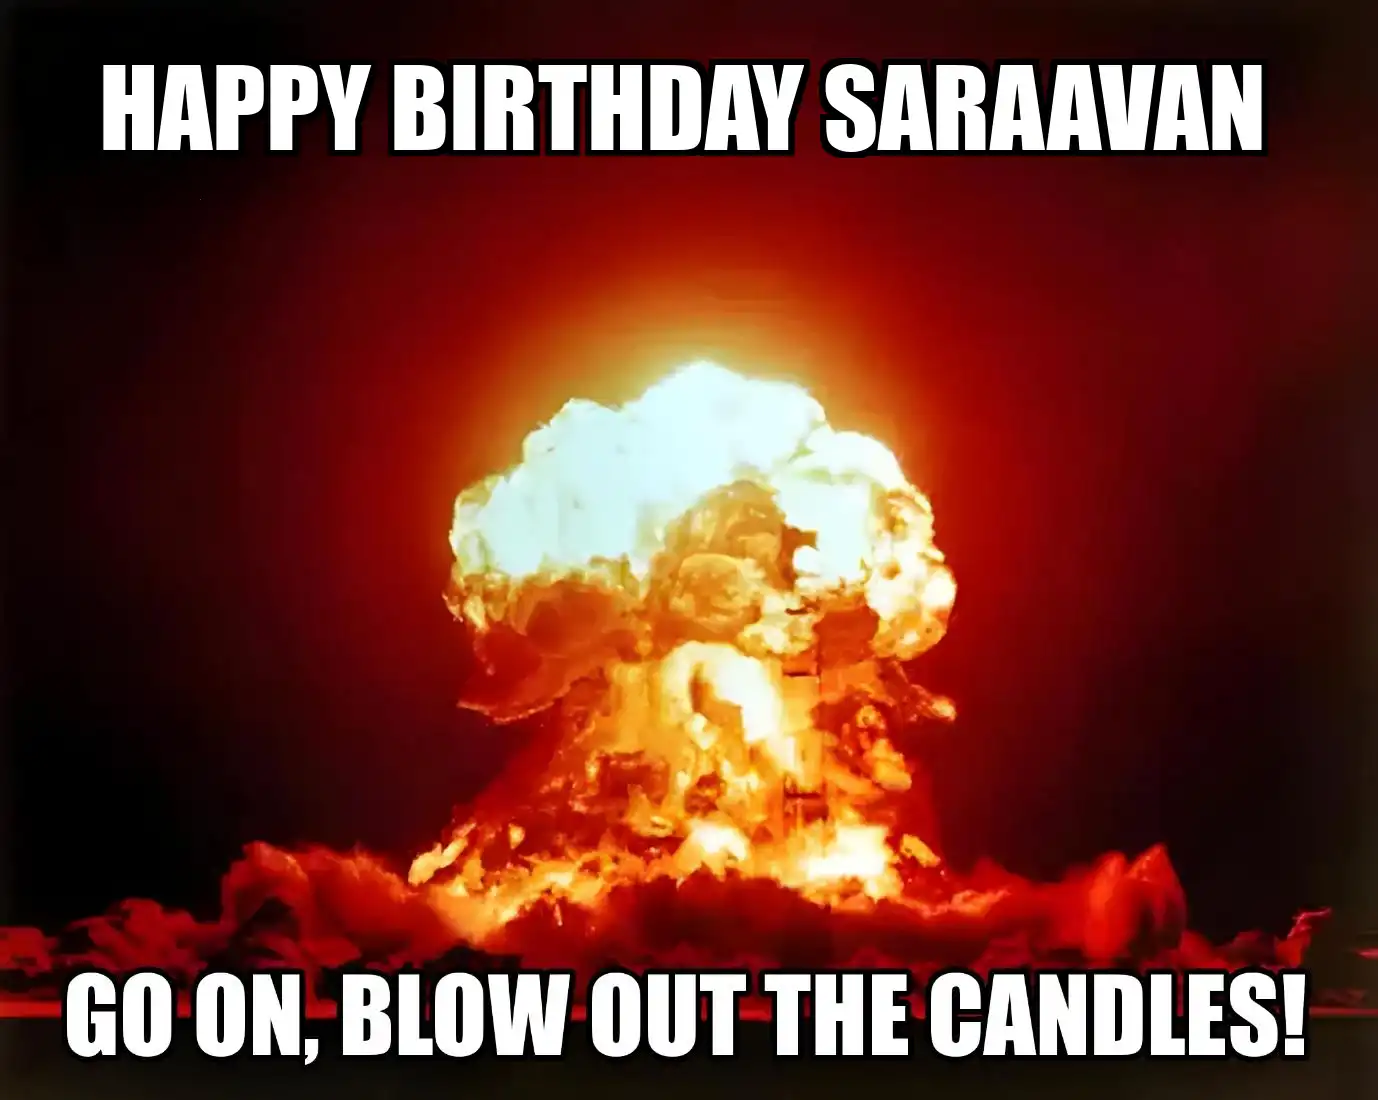 Happy Birthday Saraavan Go On Blow Out The Candles Meme